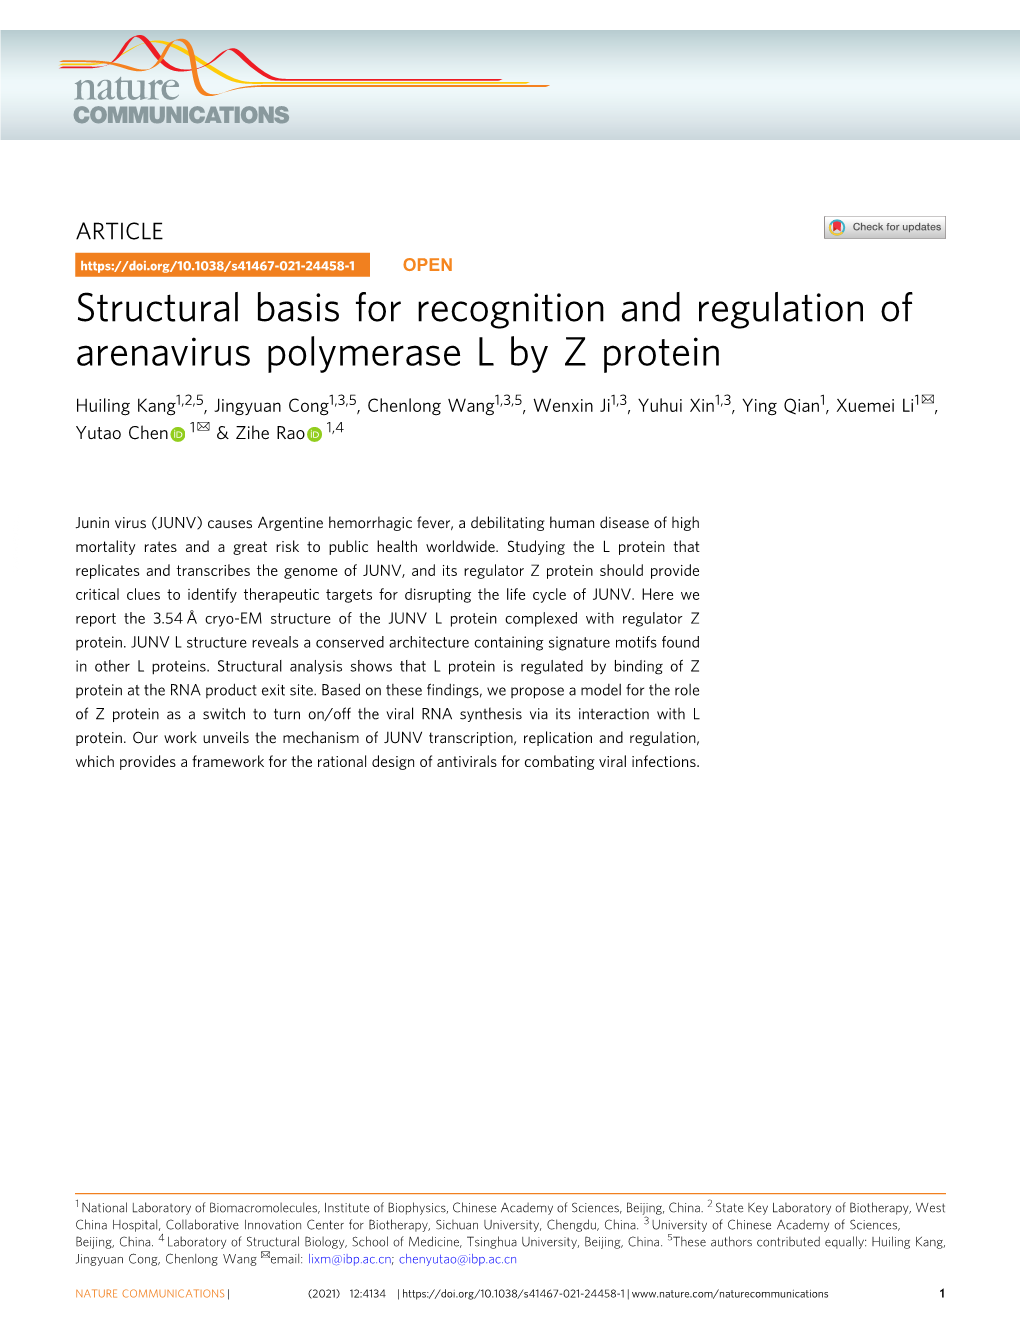 Structural Basis for Recognition and Regulation of Arenavirus